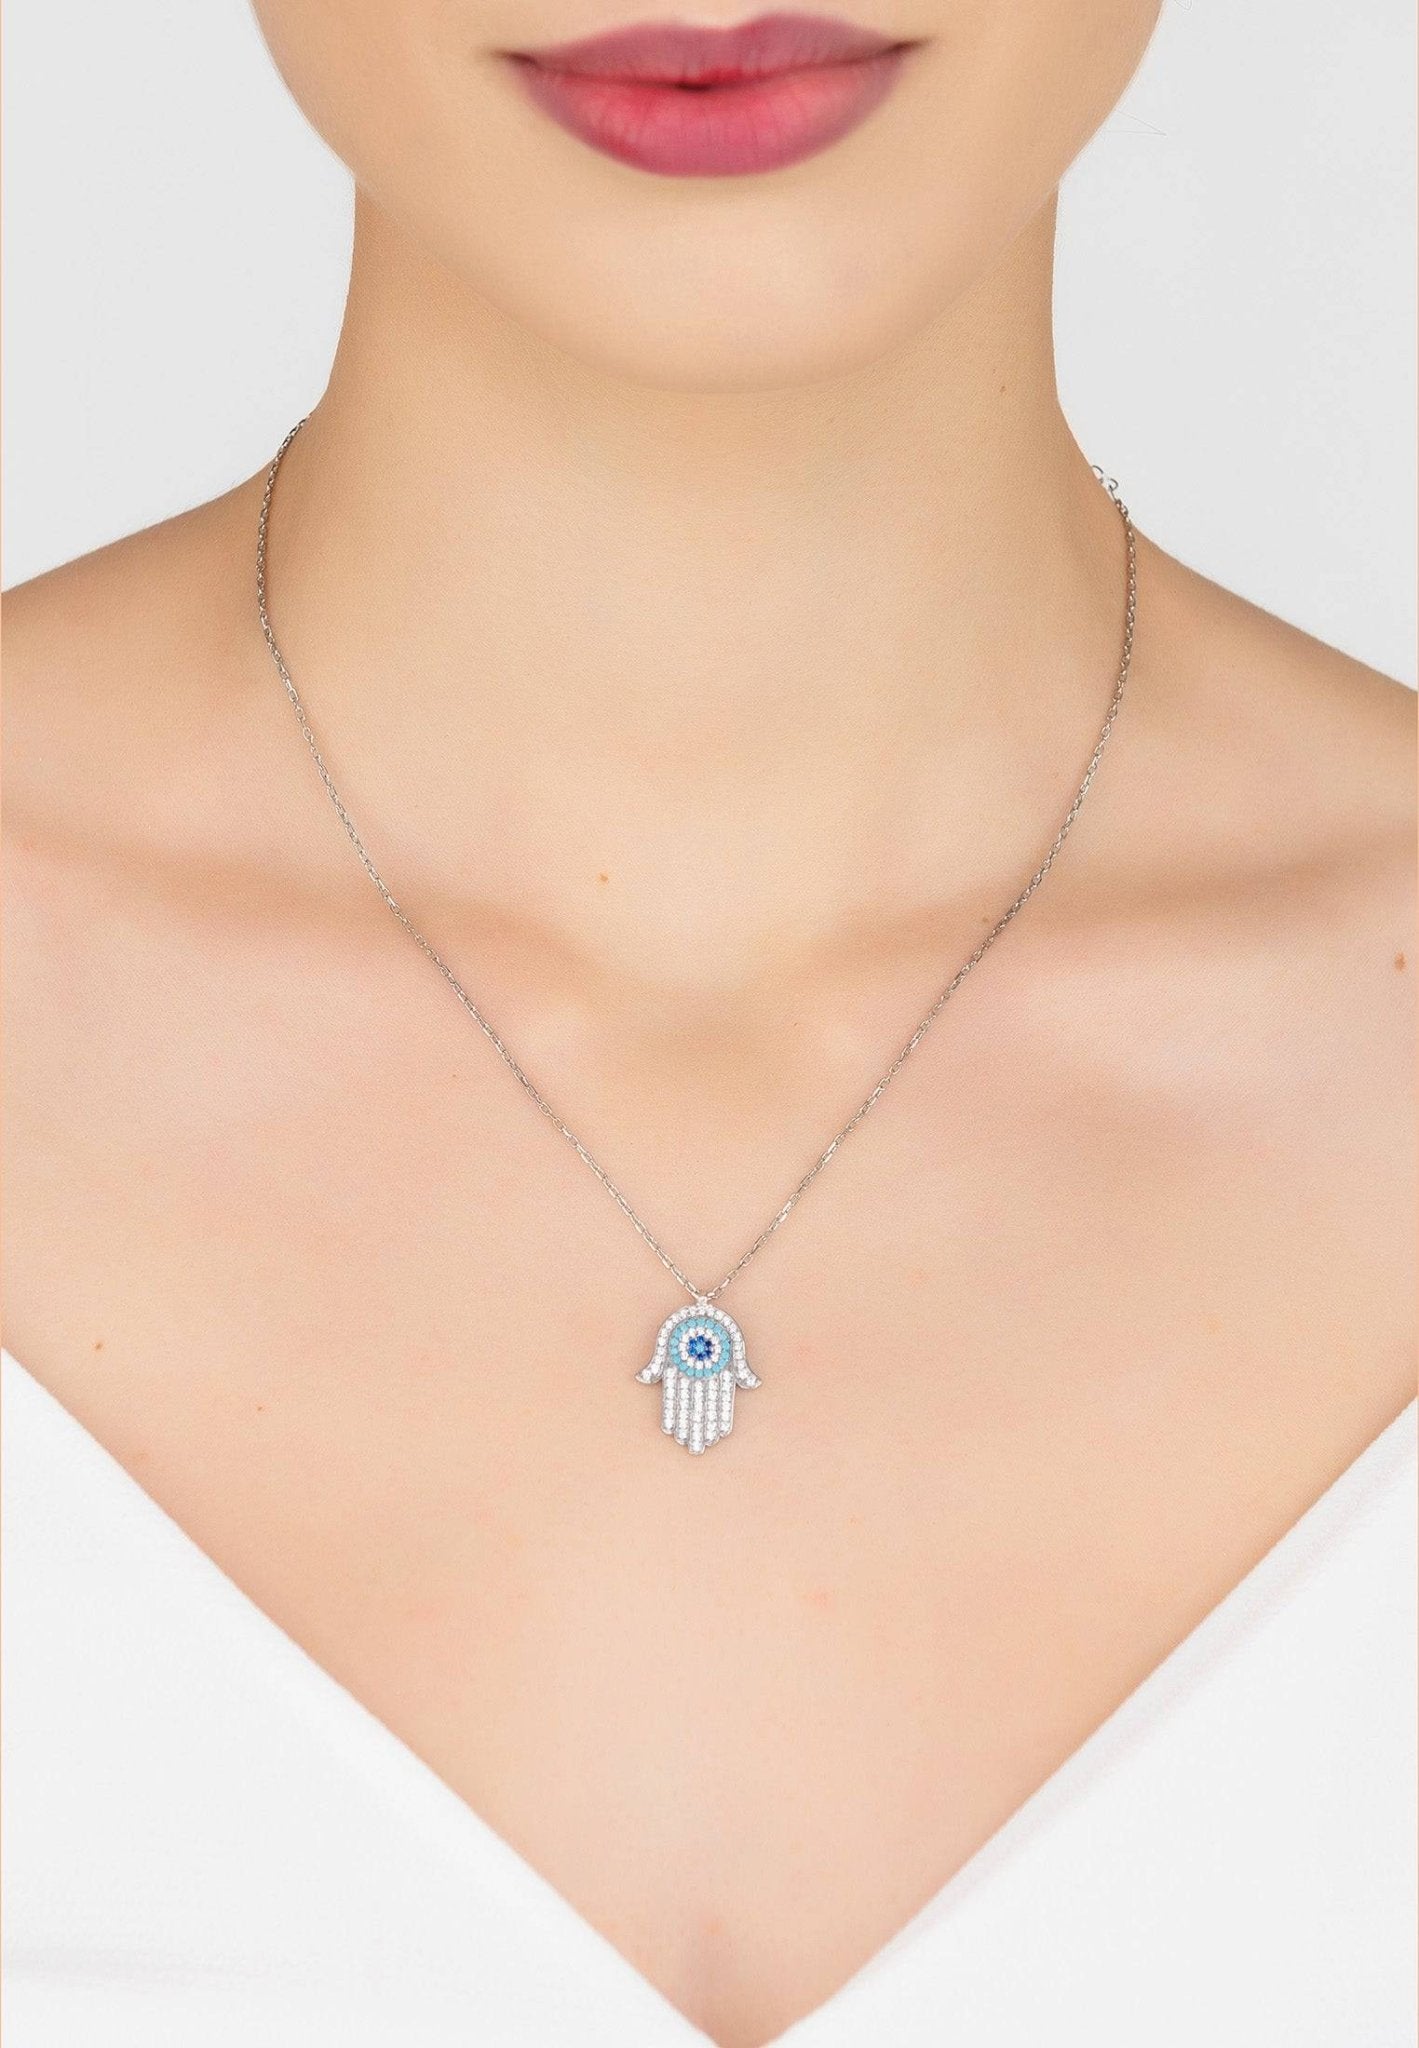 Hamsa Hand With Evil Eye Pendant Necklace Turquoise Silver - LATELITA Necklaces